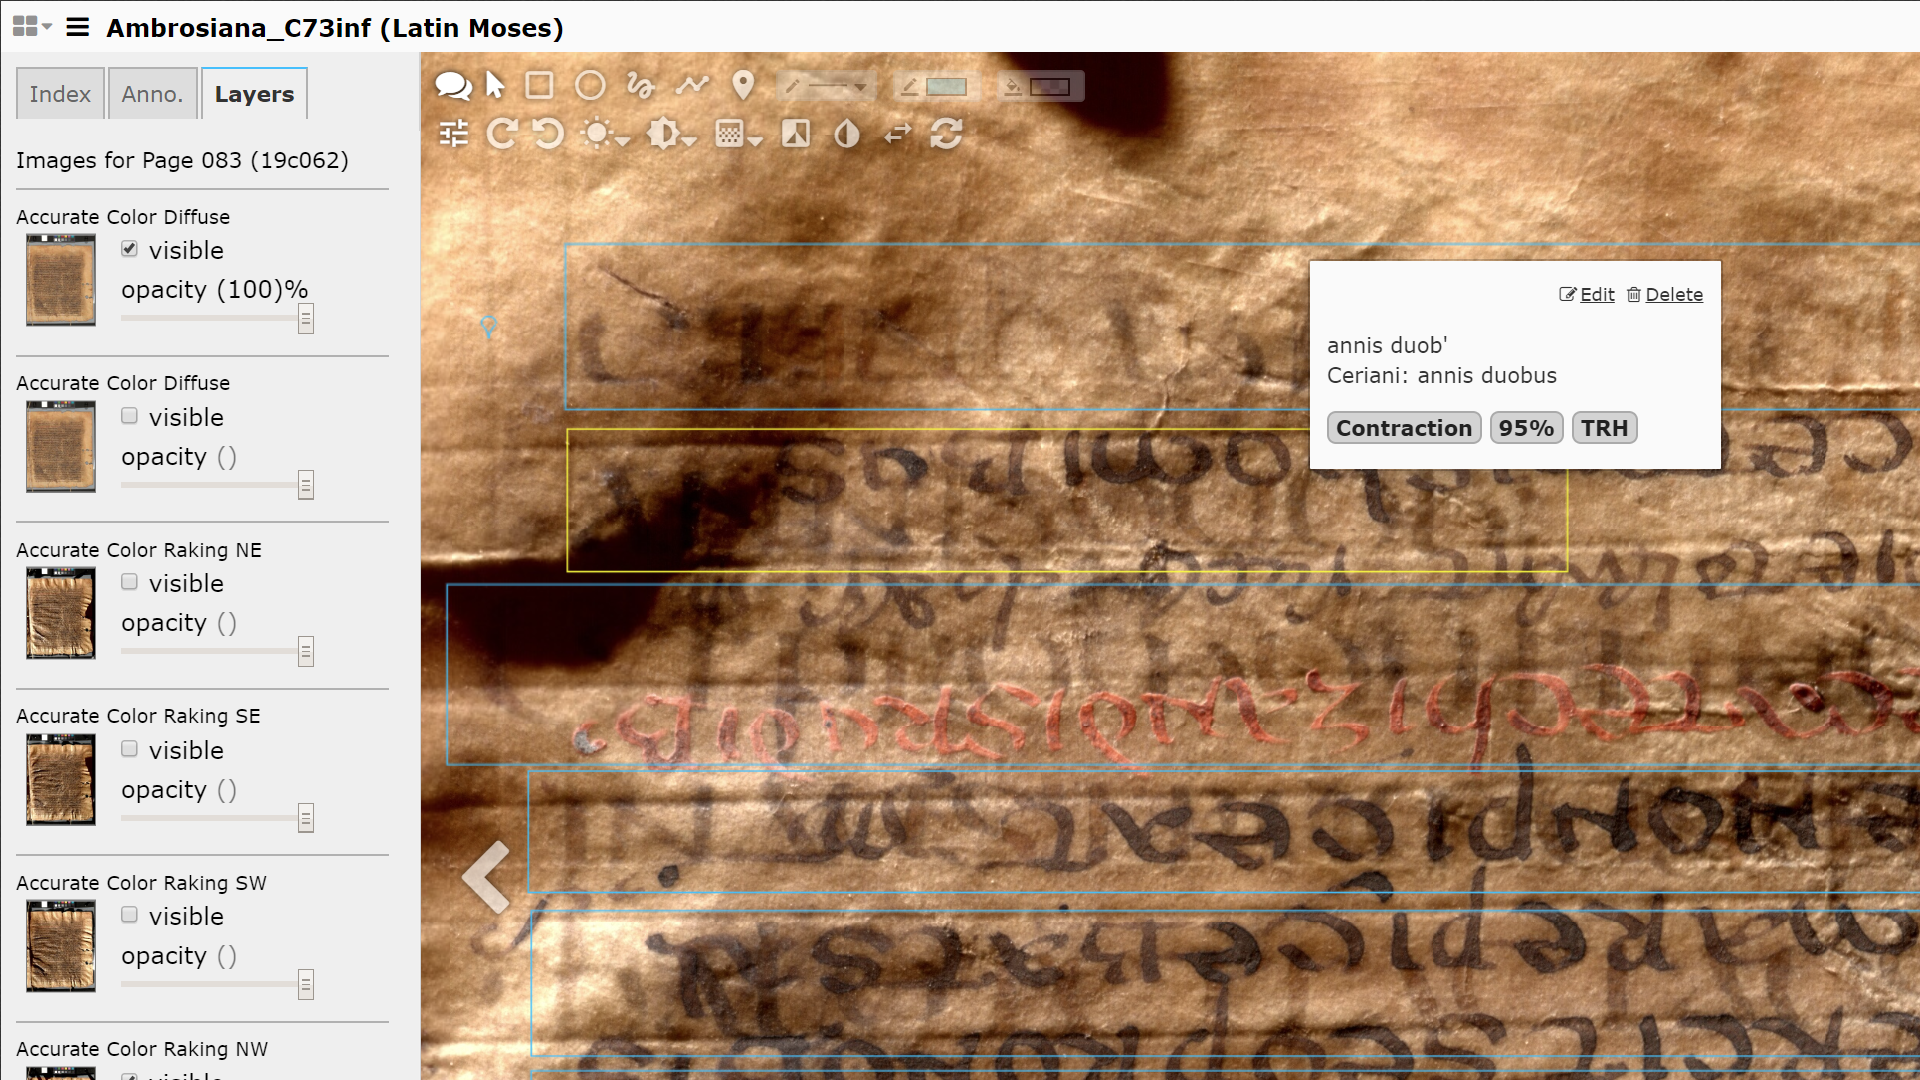 Figure 22: Screenshot of Mirador showing the layers and annotation functionality. 